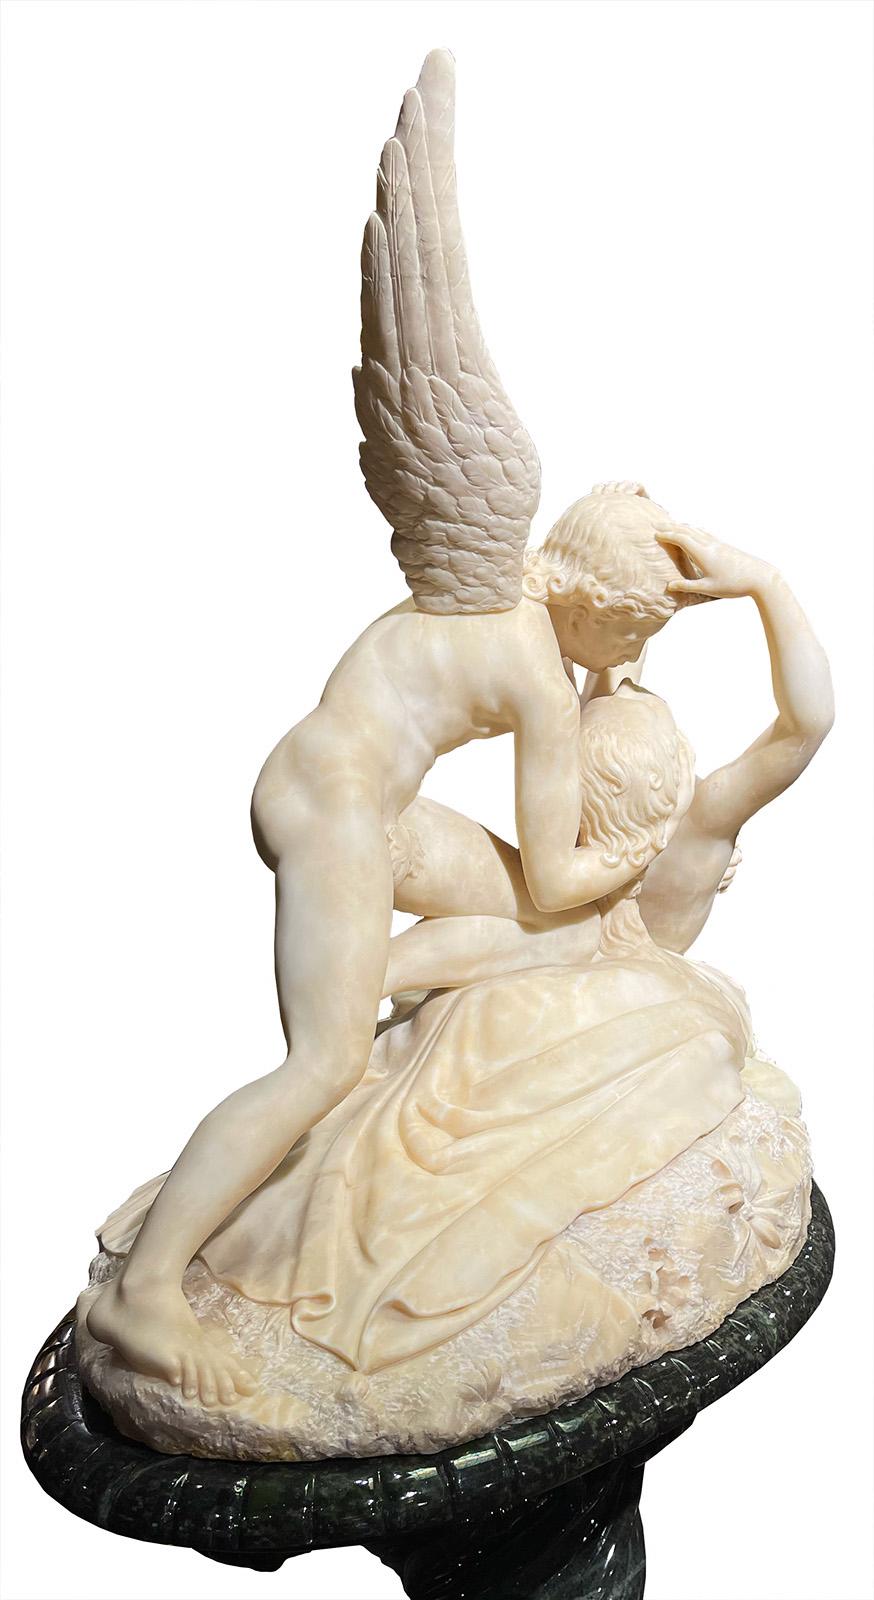 Psyche Revived by Cupid's Kiss Marble Sculpture on Pedestal after Antonio Canova In Good Condition For Sale In Salt Lake City, UT